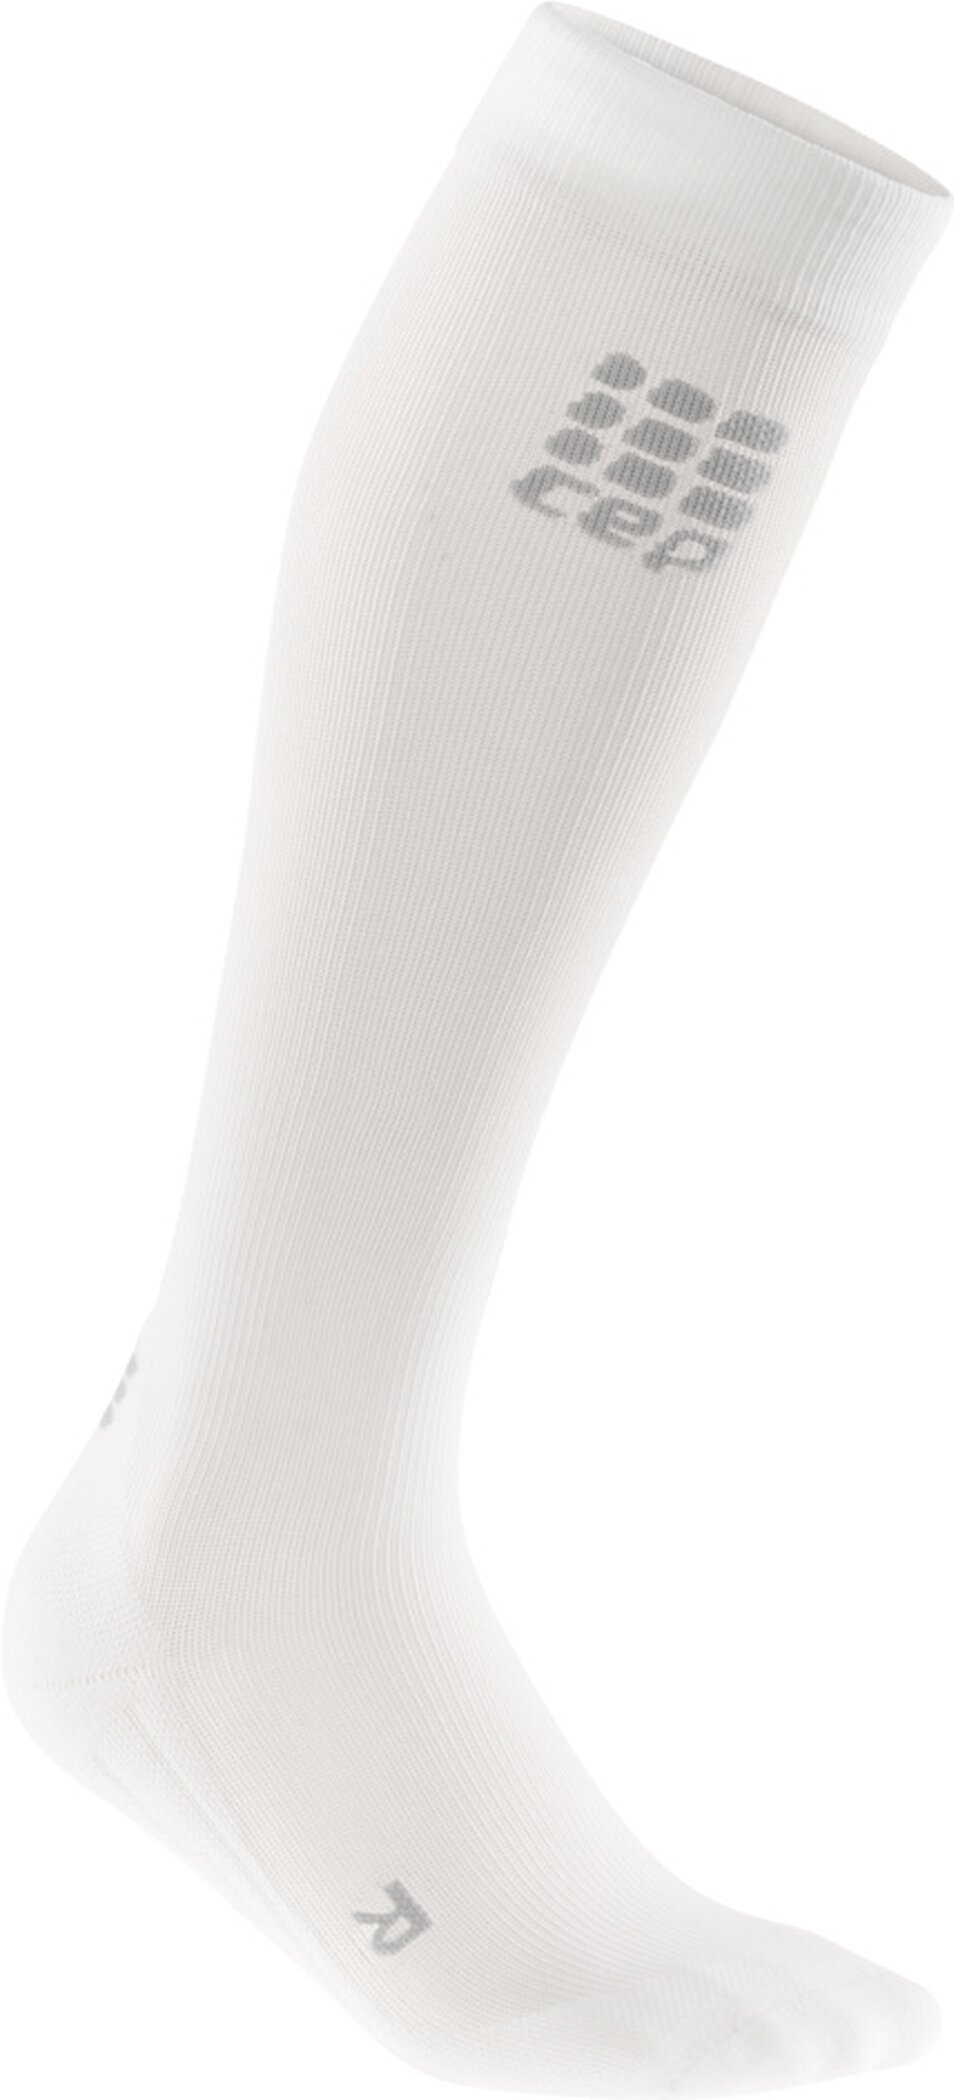 CEP socks for recovery, women